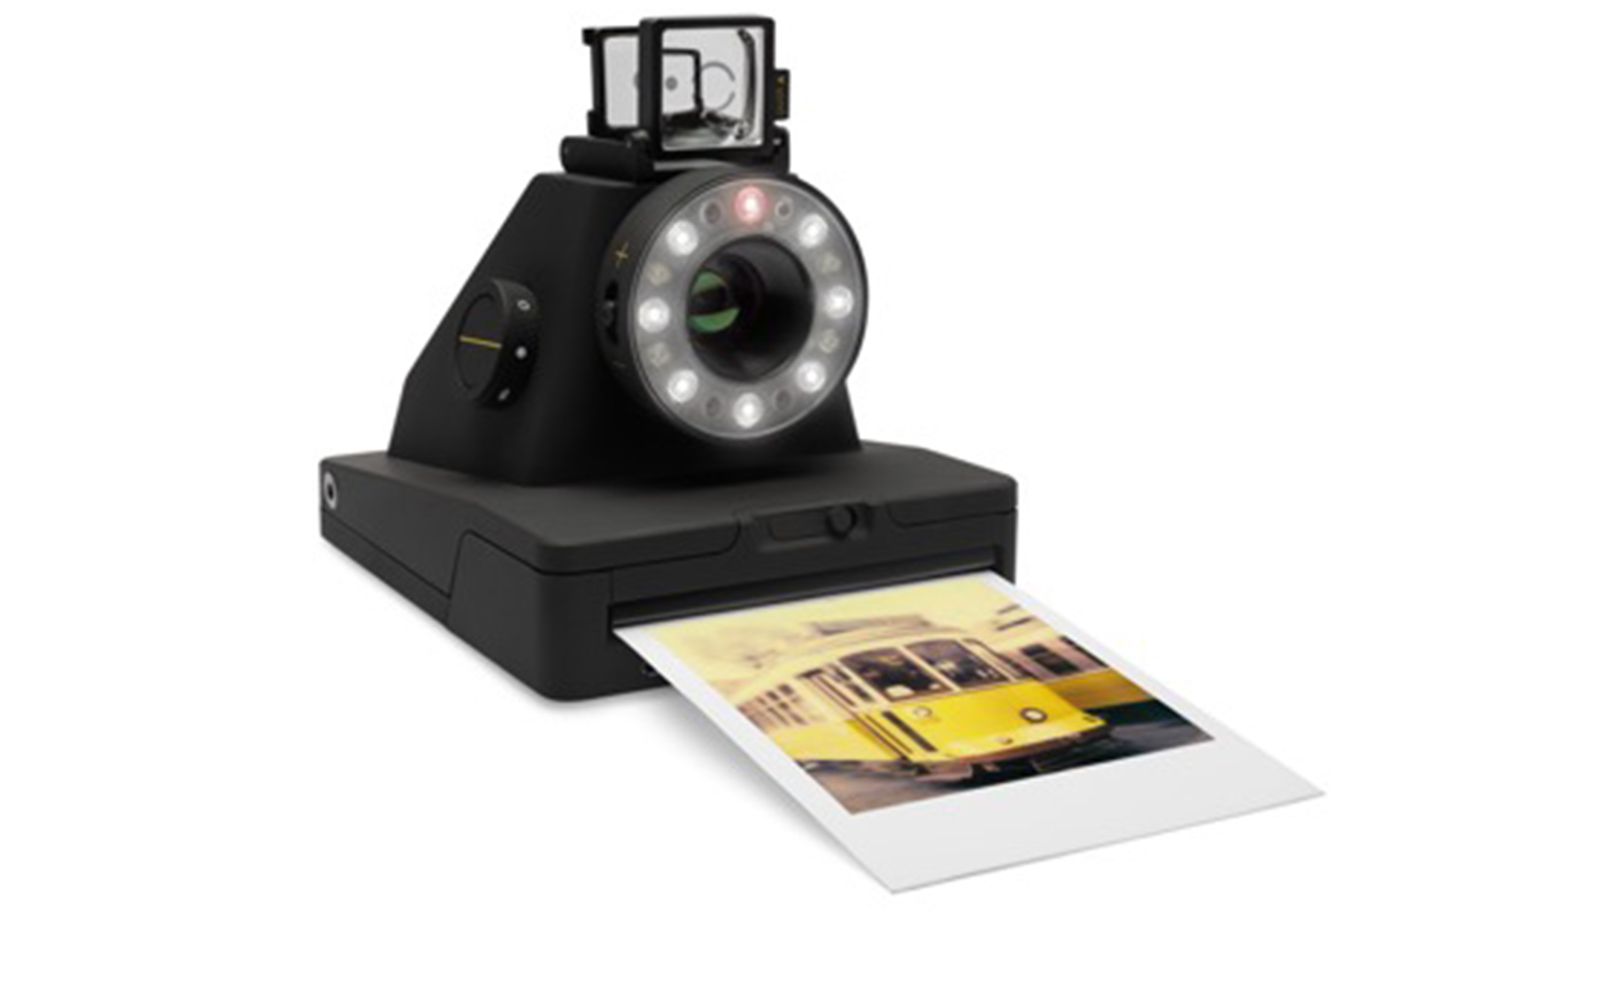 impossible project i 1 camera brings polaroid style instant photos bang up to date image 1